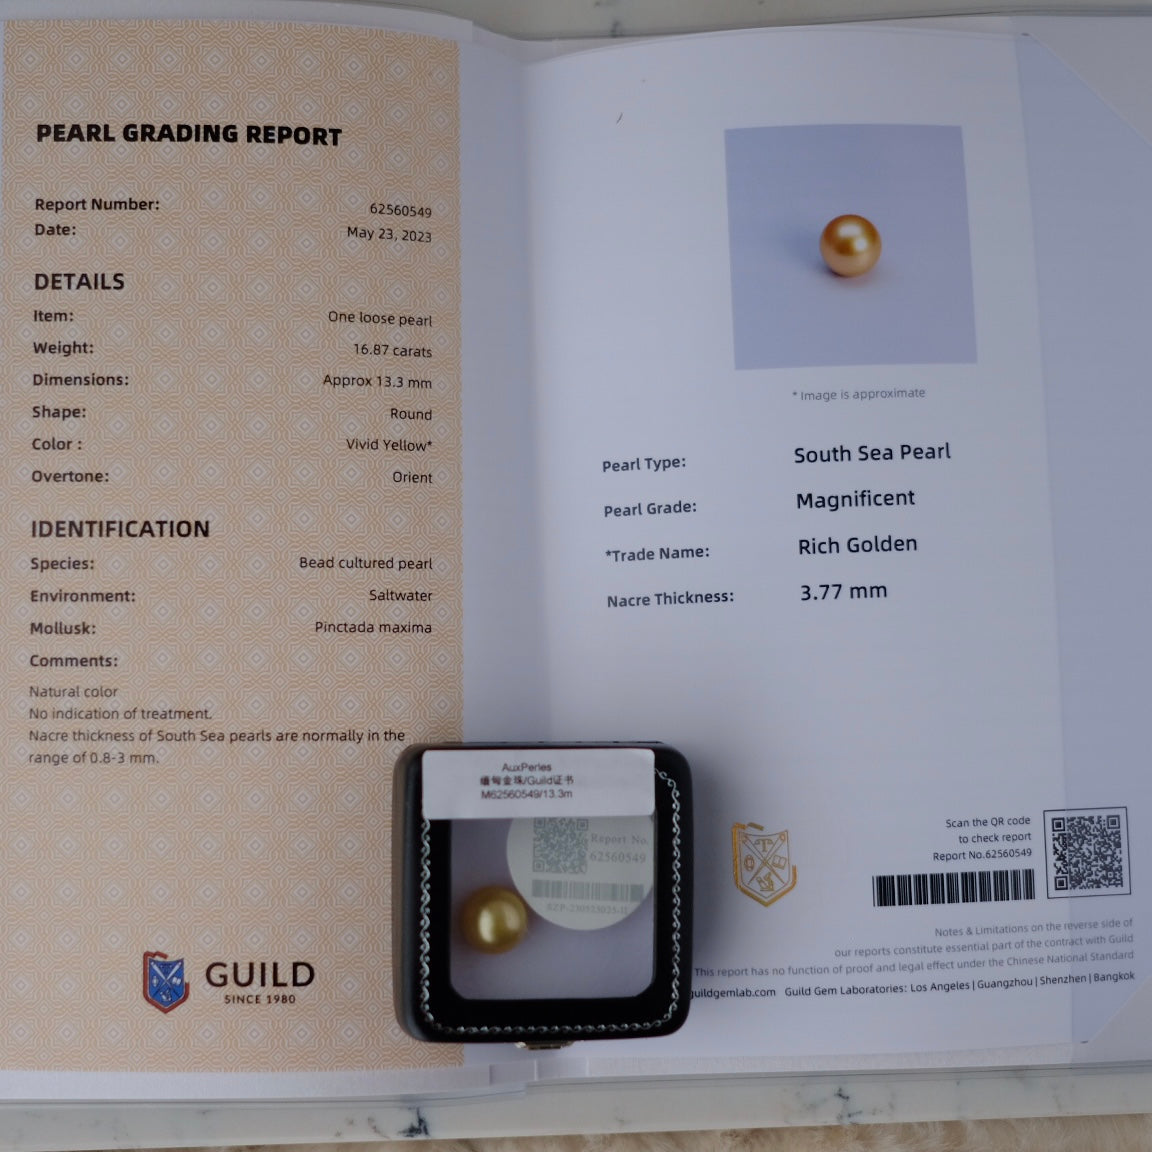 Golden South Sea Pearl, 13.3mm, Loose Pearl, GUILD Certificate